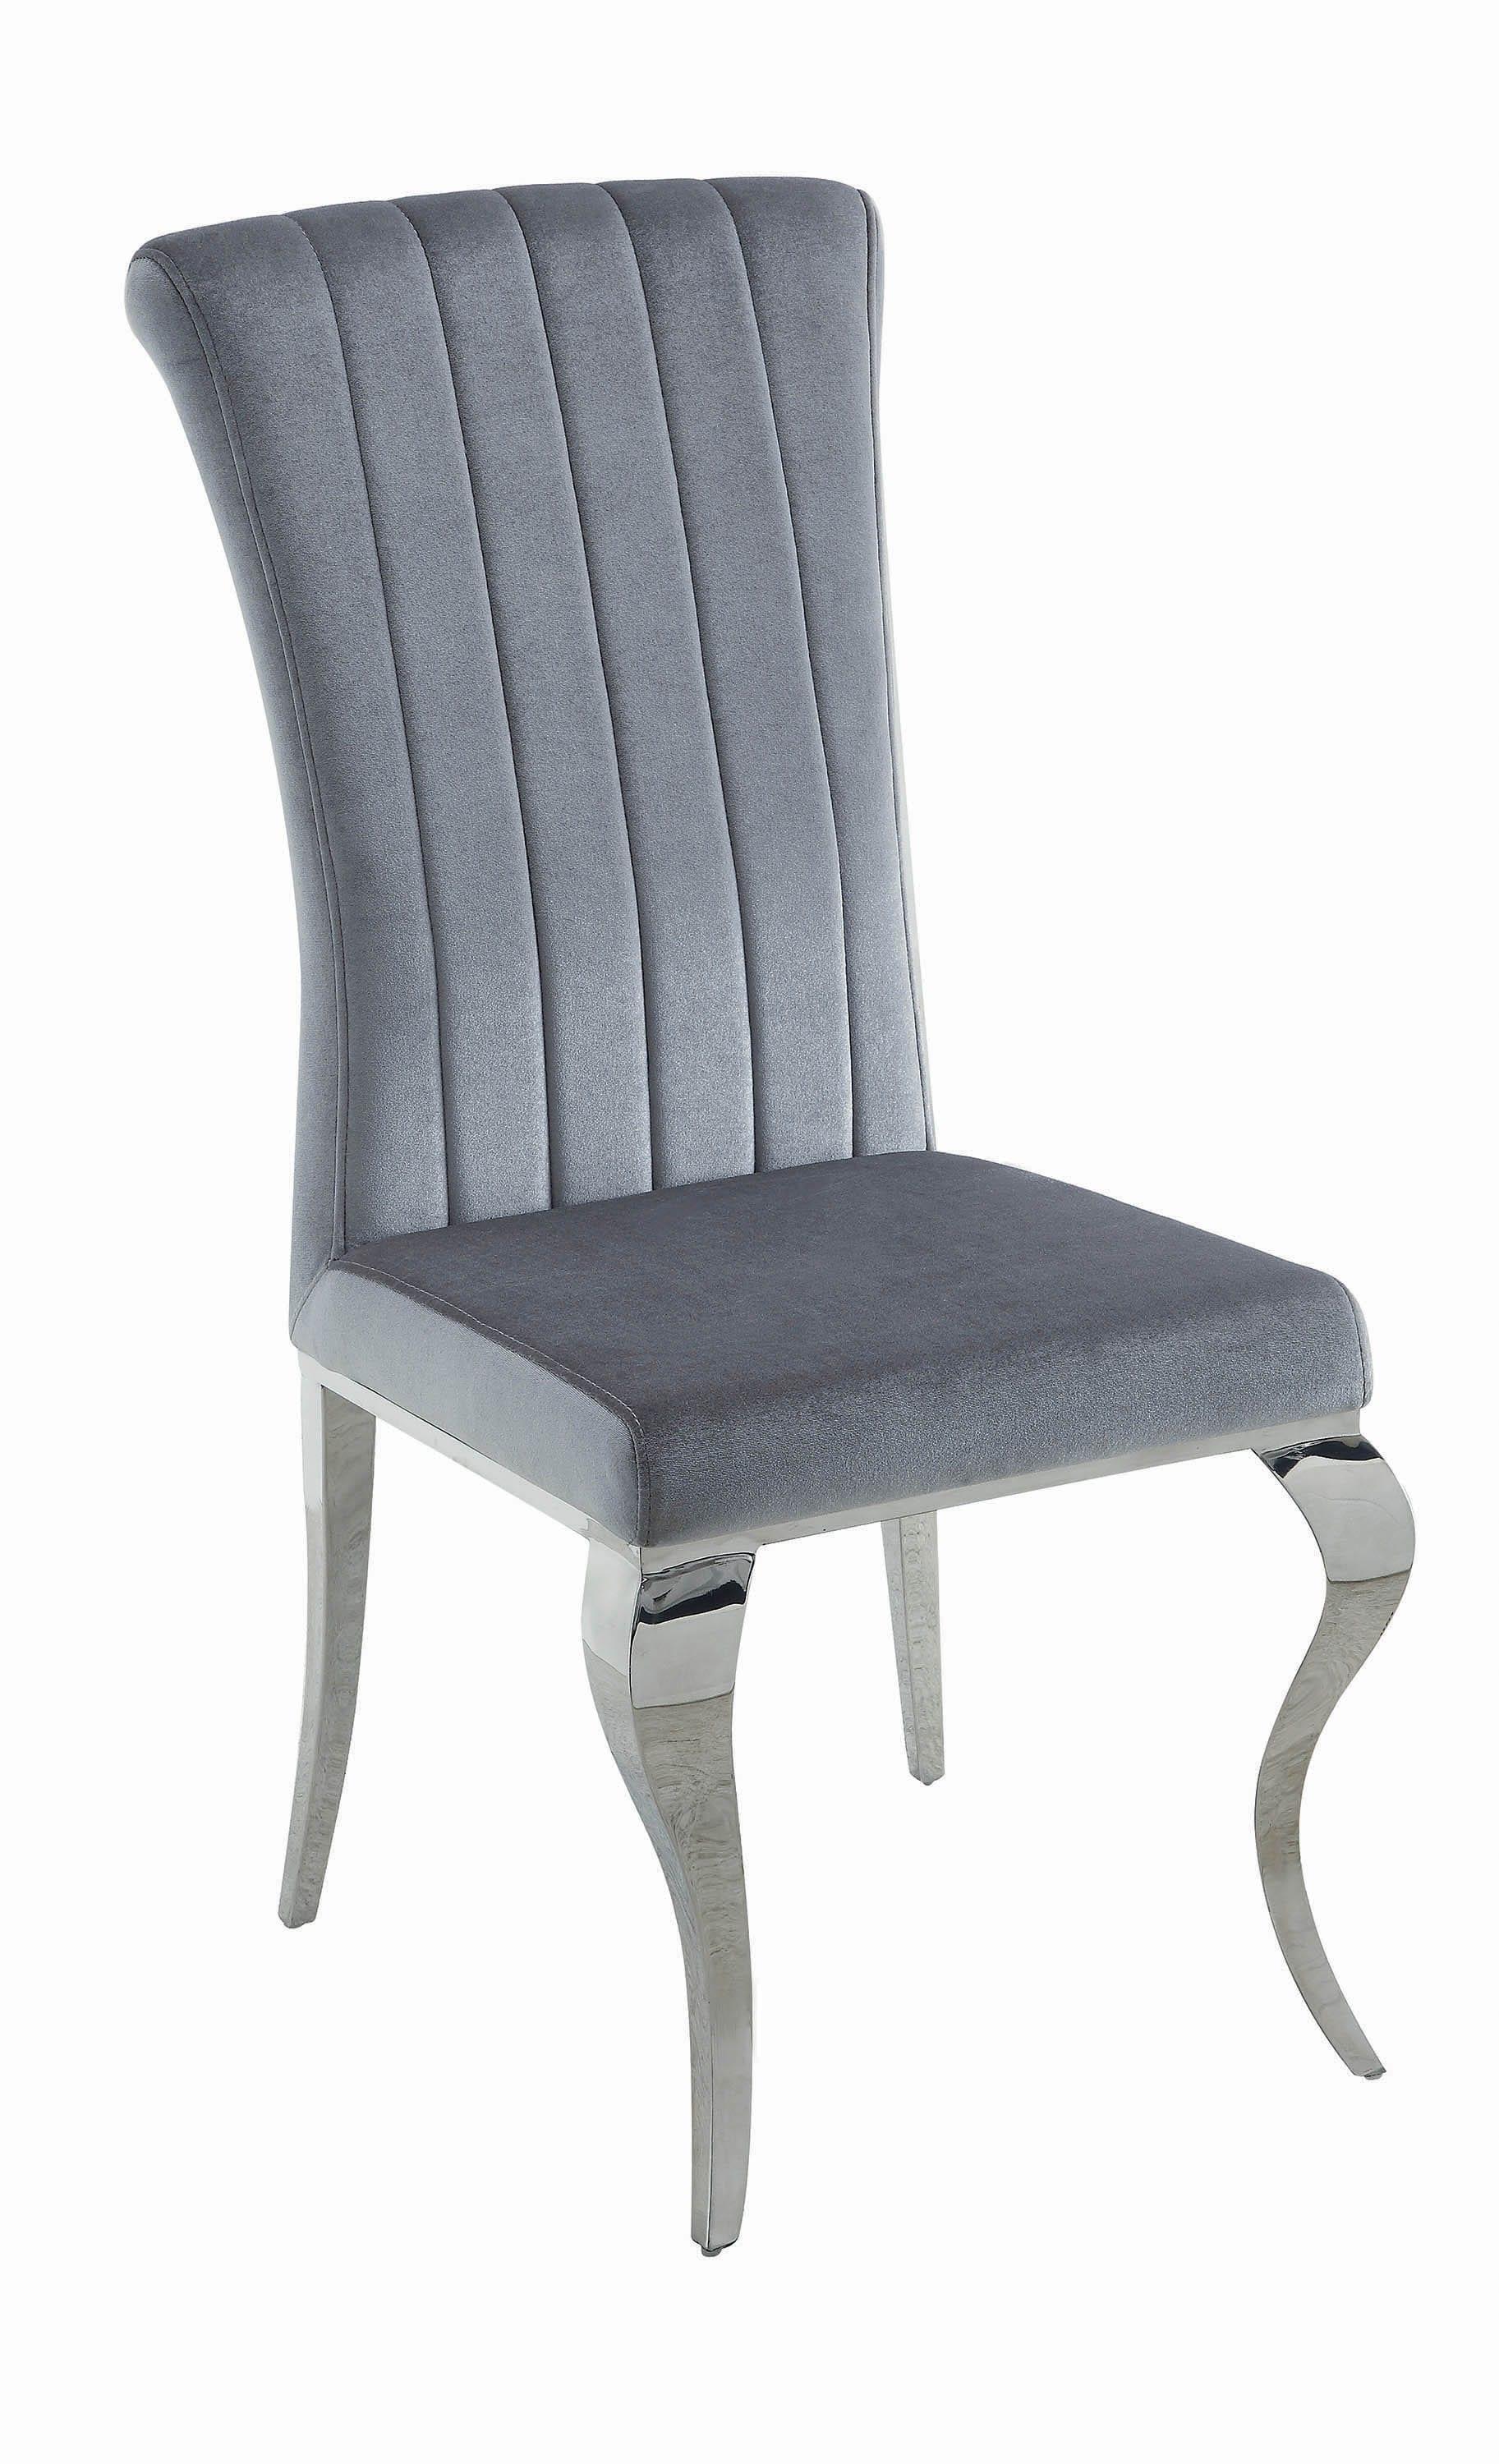 Modern Dining Chair Manessier 105073 in Gray Fabric